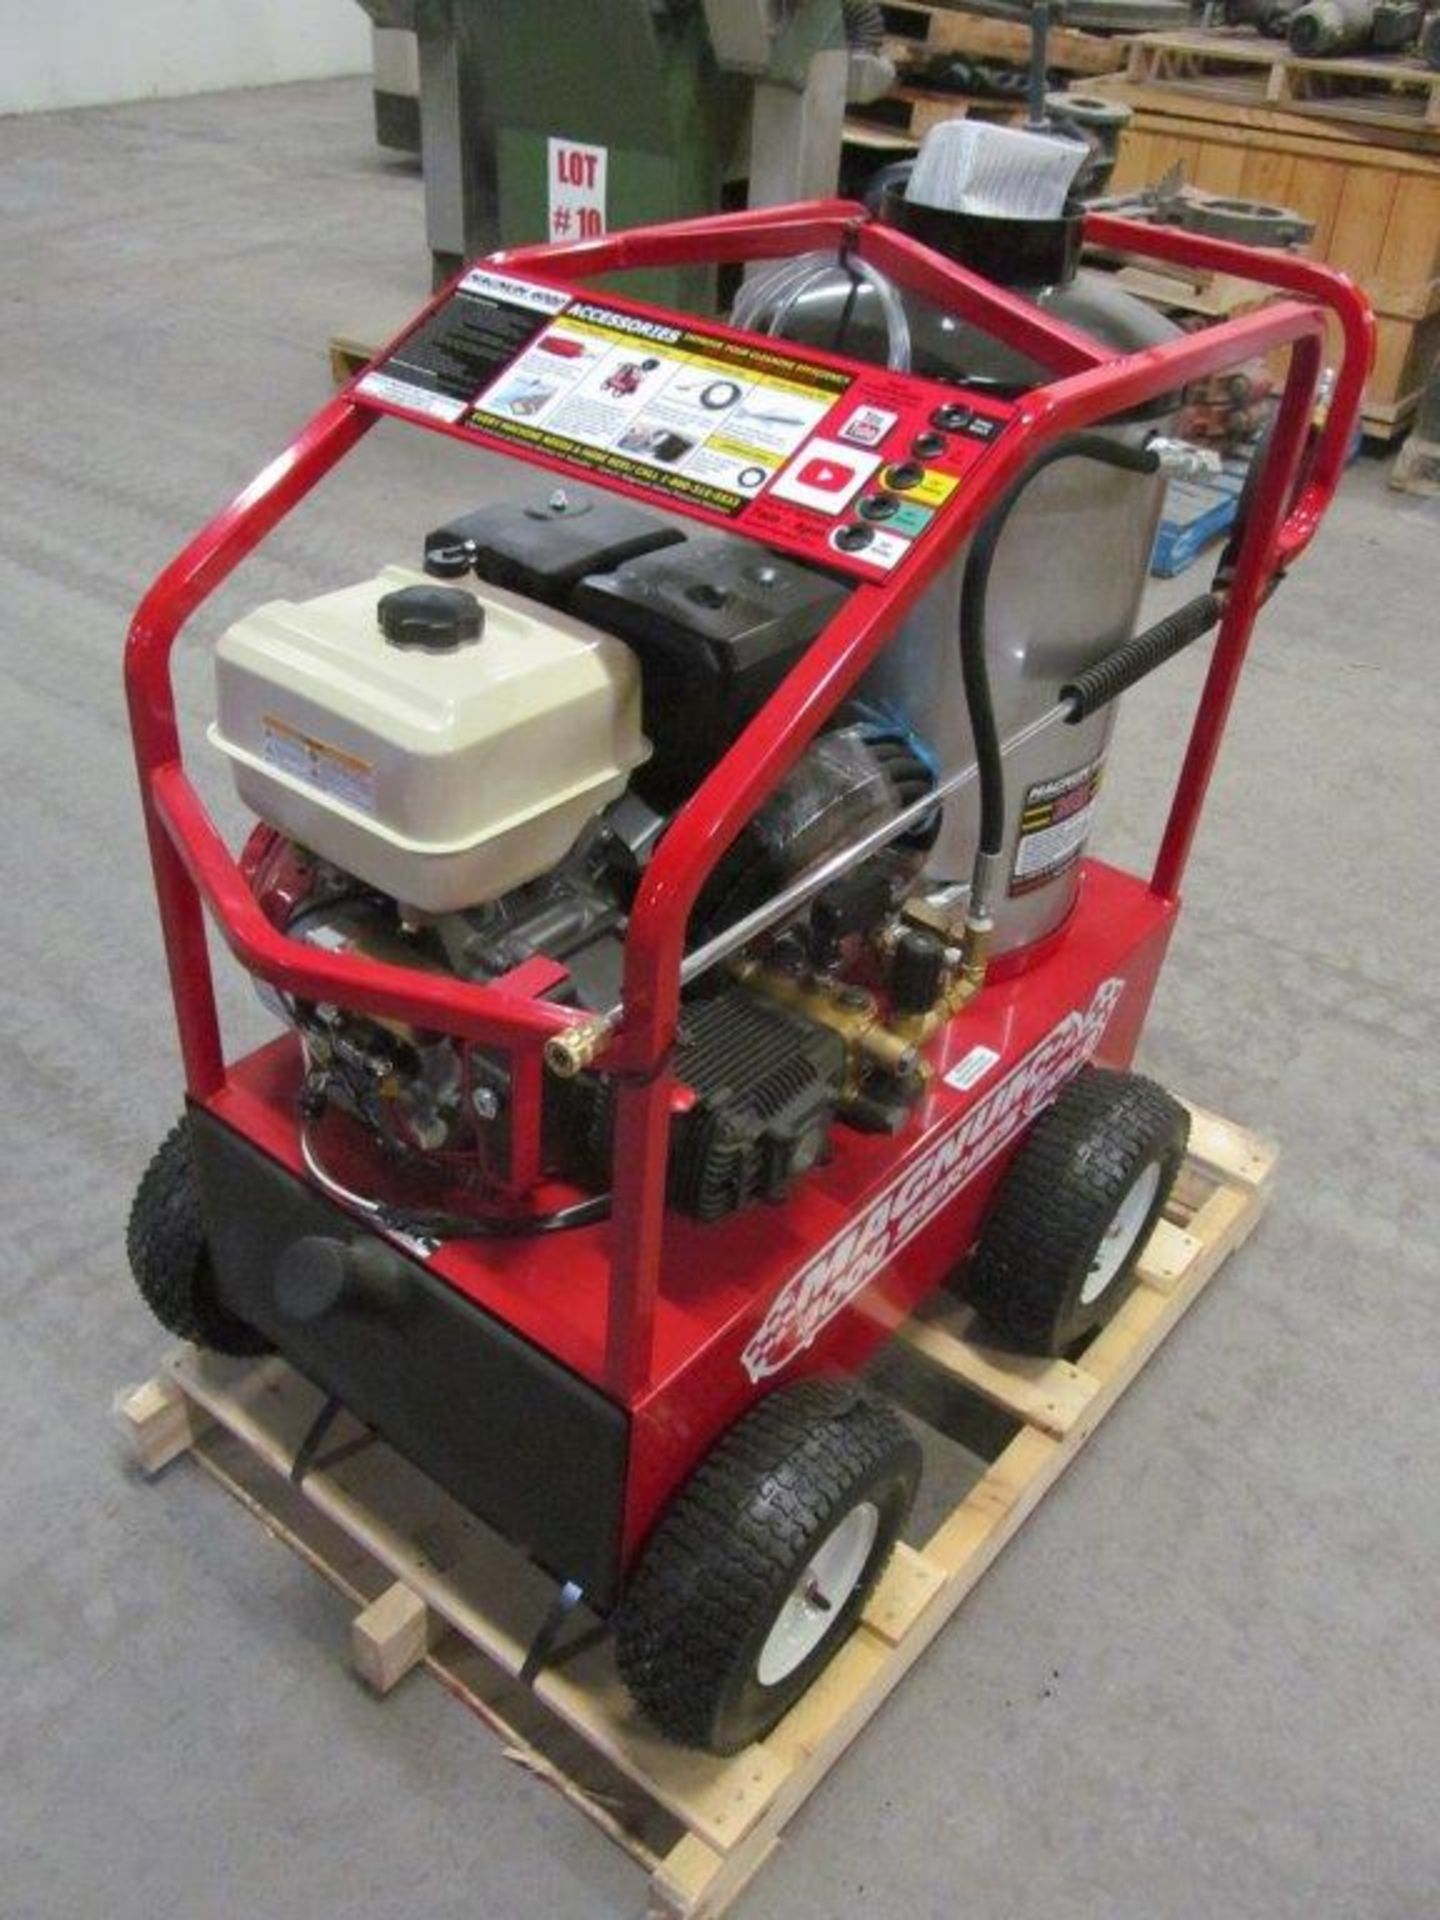 BRAND NEW EASY-KLEEN HOT WATER PRESSURE WASHER MODEL MAGNUM GOLD, LOCATION: HAWKESBURY, ONTARIO - Image 2 of 11